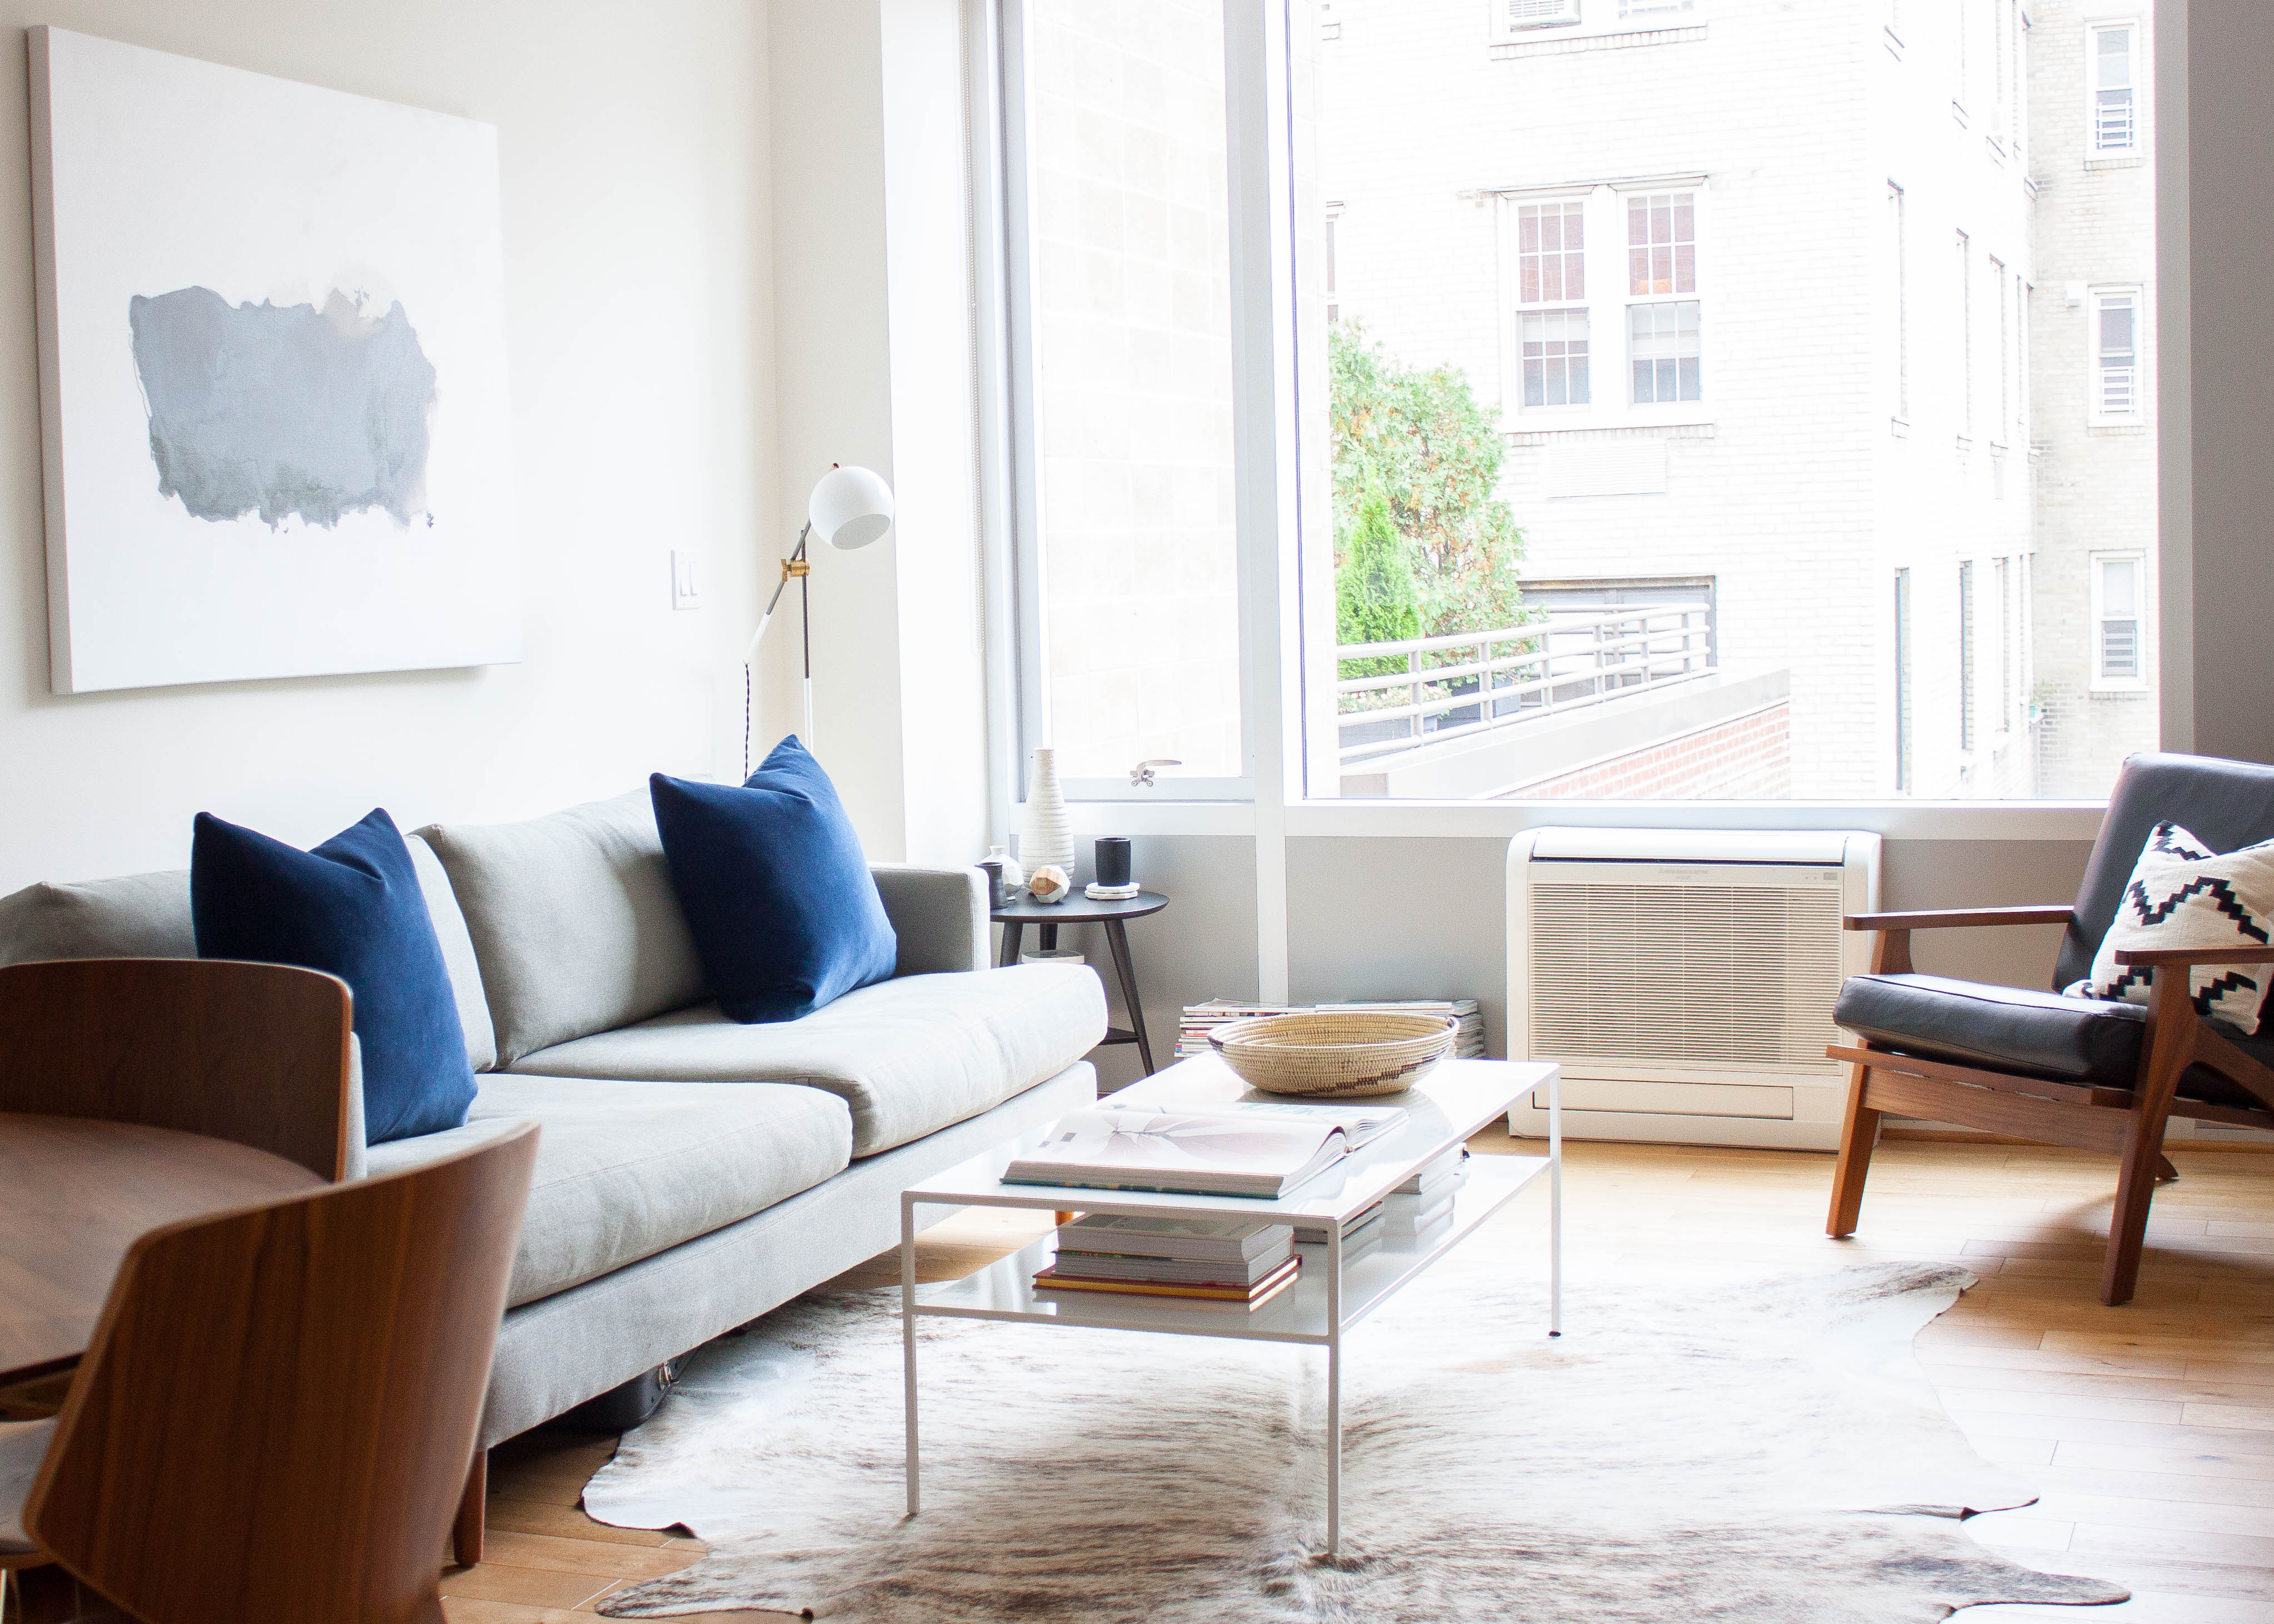 small living room furniture tour: a nyc coupleu0027s minimalist retreat from hectic city life GBEYZTM